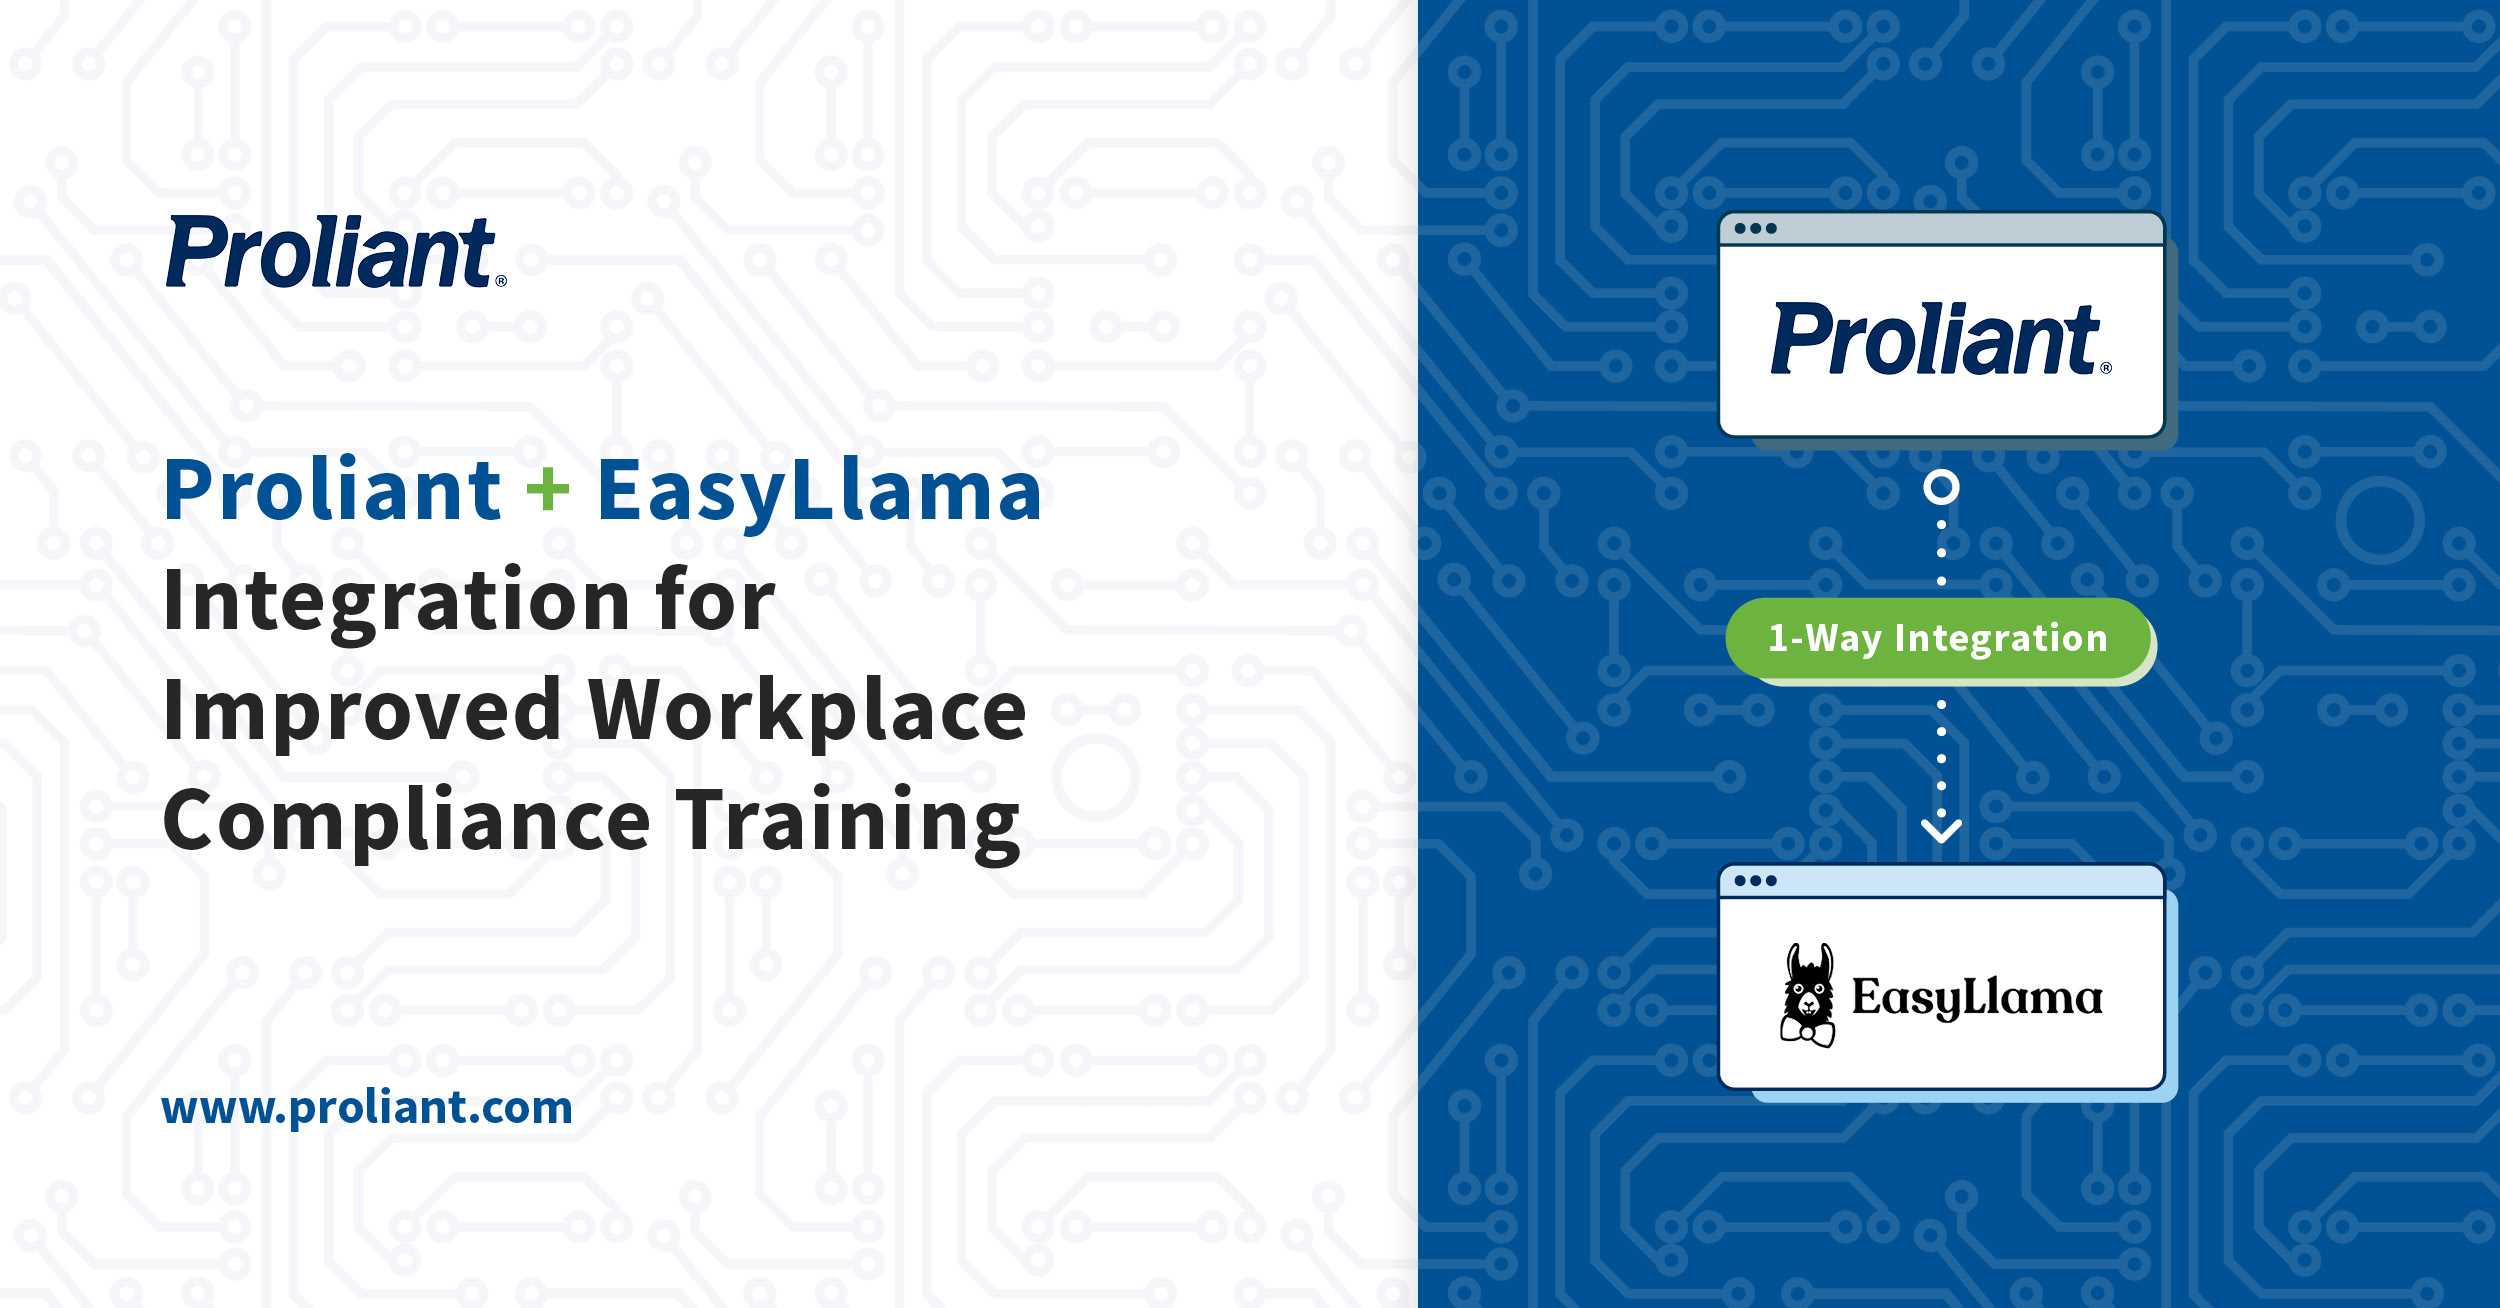 Proliant Adds EasyLlama Integration For Improved Workplace Compliance Training